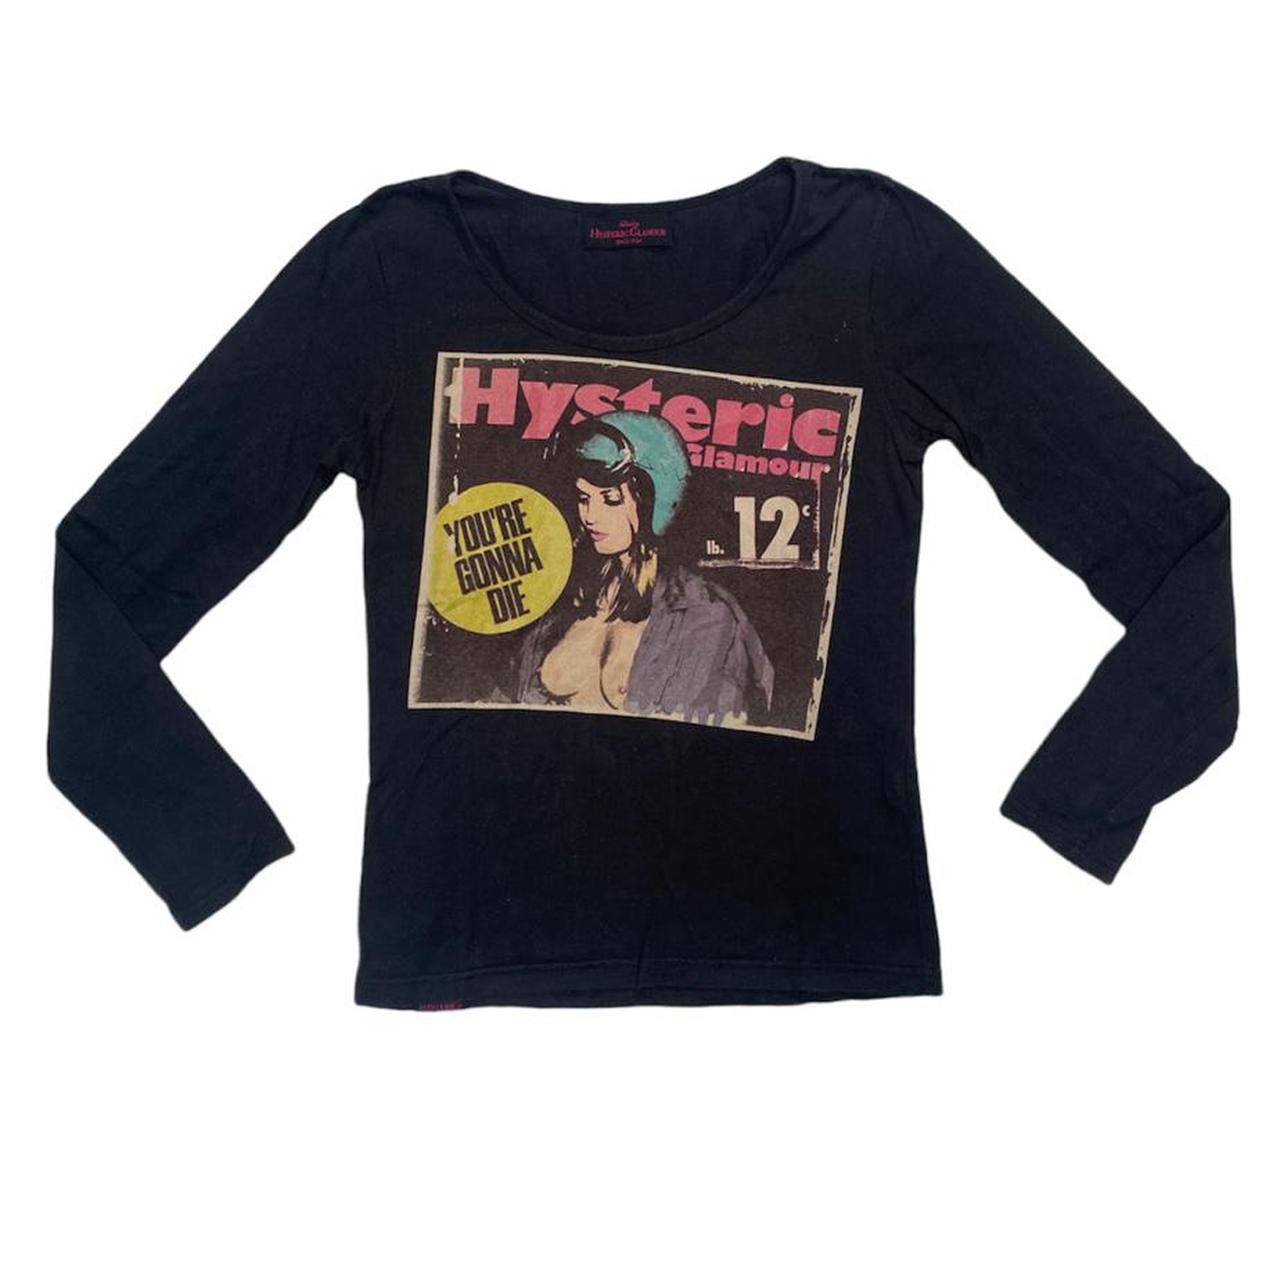 unreal Hysteric Glamour top long sleeve S ☆⋅⋆ 90s - Depop